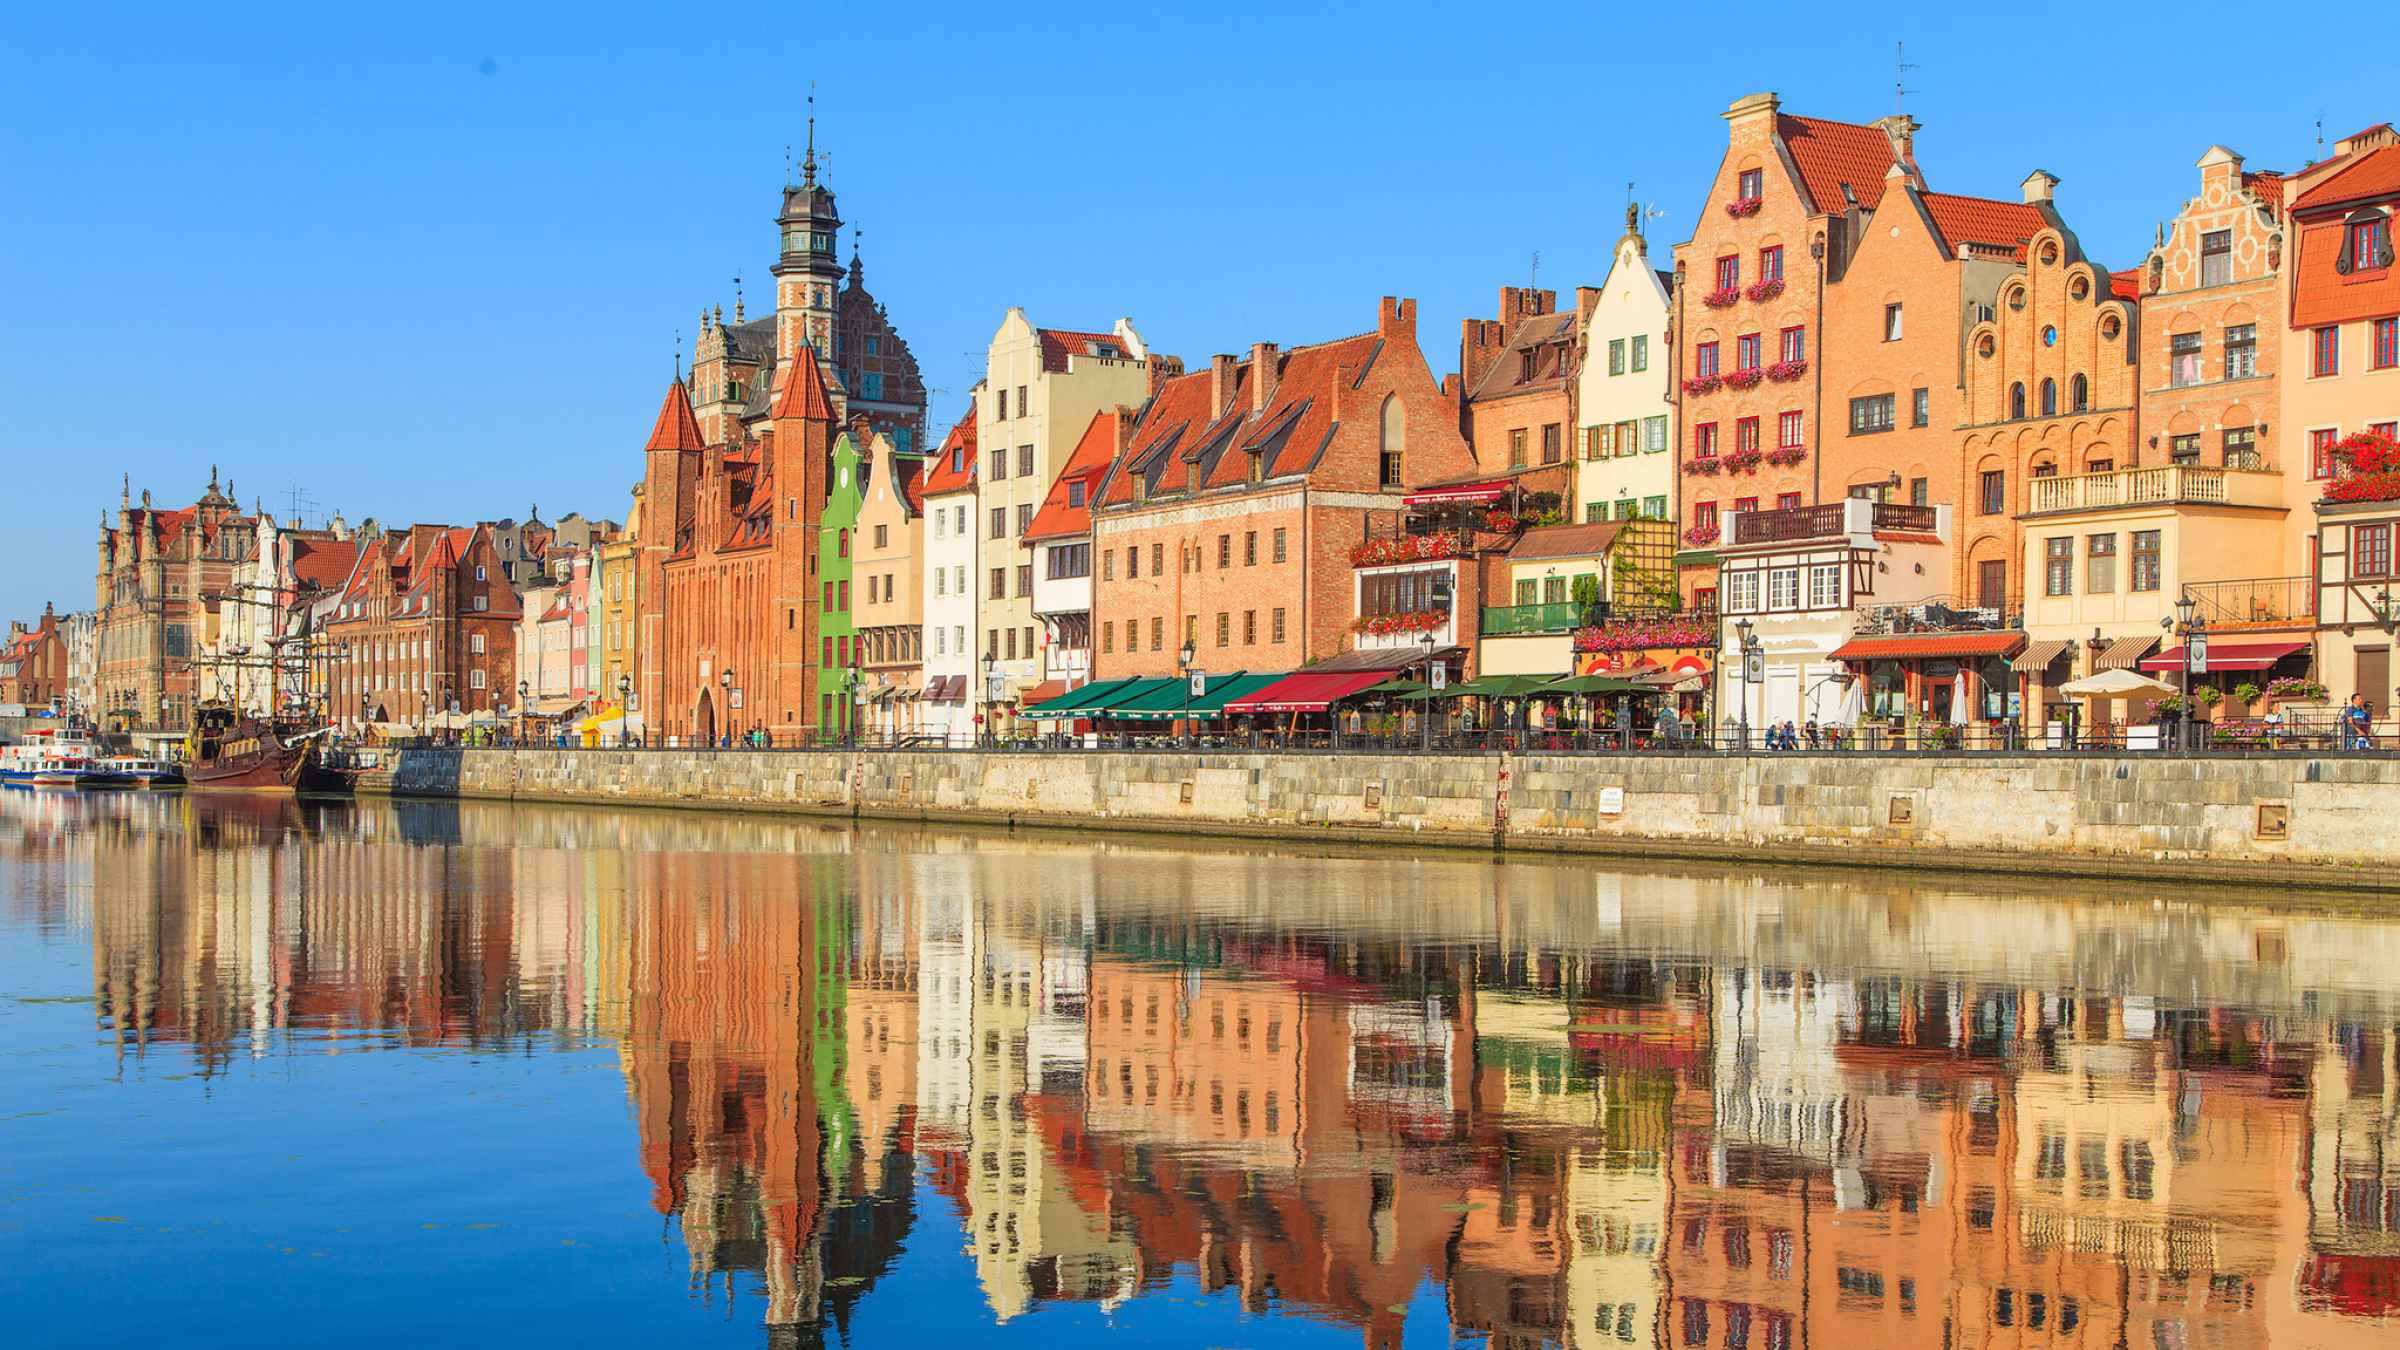 Gdansk 2021 Top 10 Tours & Activities (with Photos) Things to Do in